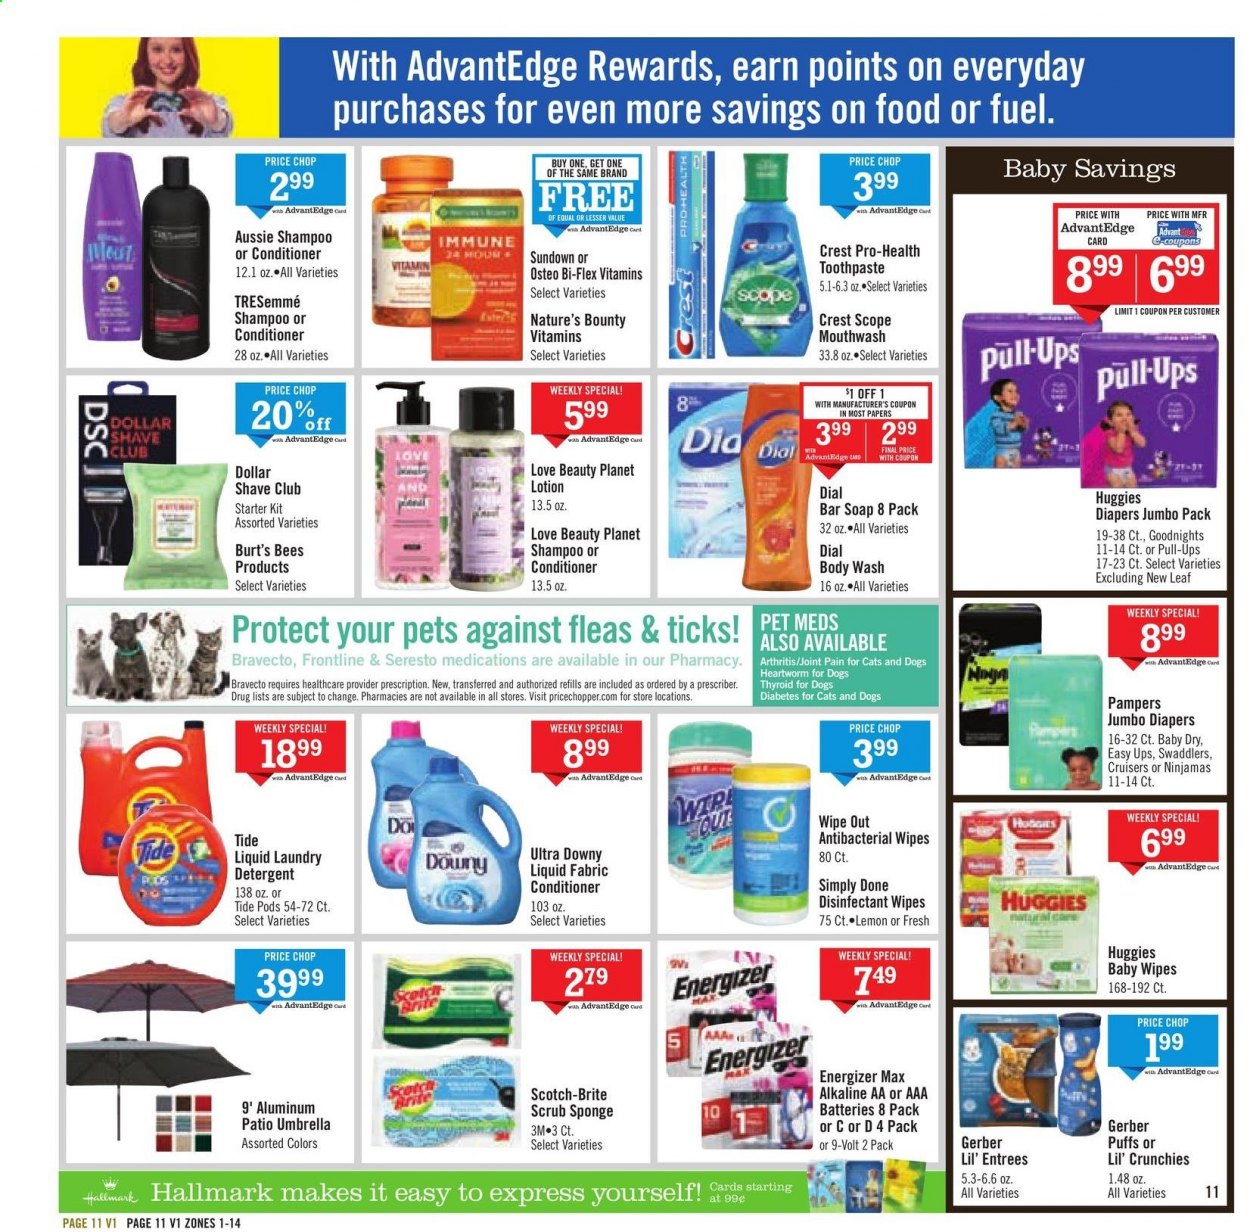 thumbnail - Price Chopper Flyer - 04/18/2021 - 04/24/2021 - Sales products - puffs, curd, Bounty, Gerber, Lil' Crunchies, wipes, Huggies, Pampers, baby wipes, nappies, detergent, desinfection, Tide, laundry detergent, Downy Laundry, body wash, shampoo, soap bar, Dial, soap, toothpaste, mouthwash, Crest, Dollar Shave Club, Aussie, conditioner, TRESemmé, Brite, body lotion, Energizer, AAA batteries, Osteo bi-flex, Bi-Flex. Page 11.